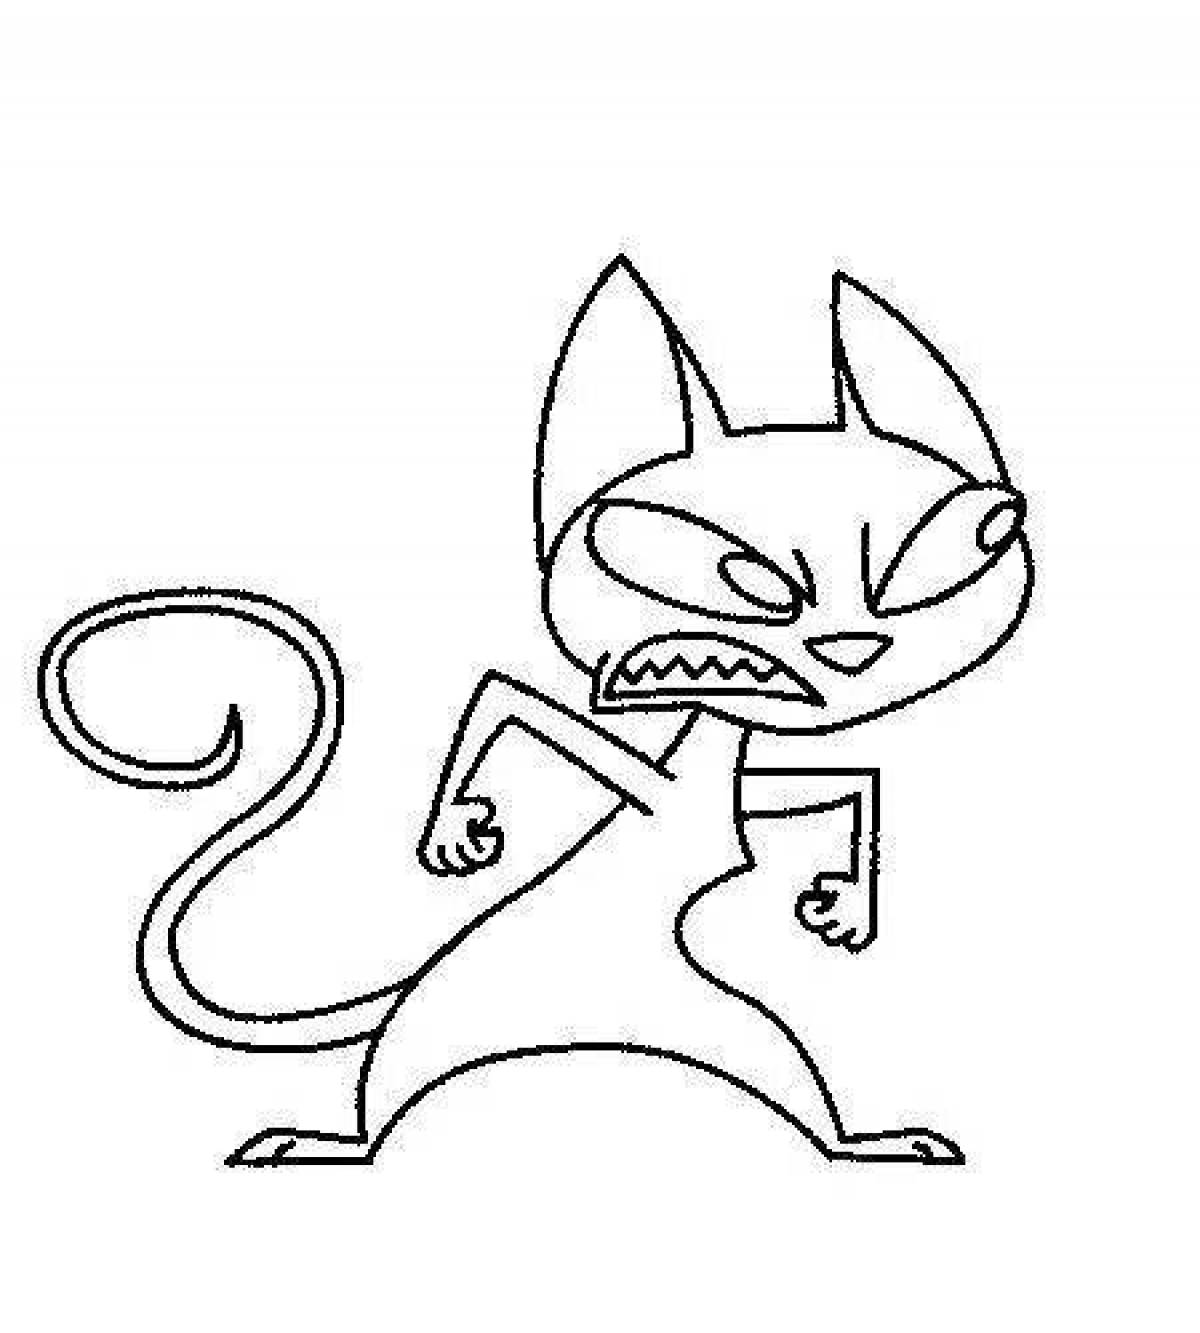 Mr Cat Animated Coloring Page